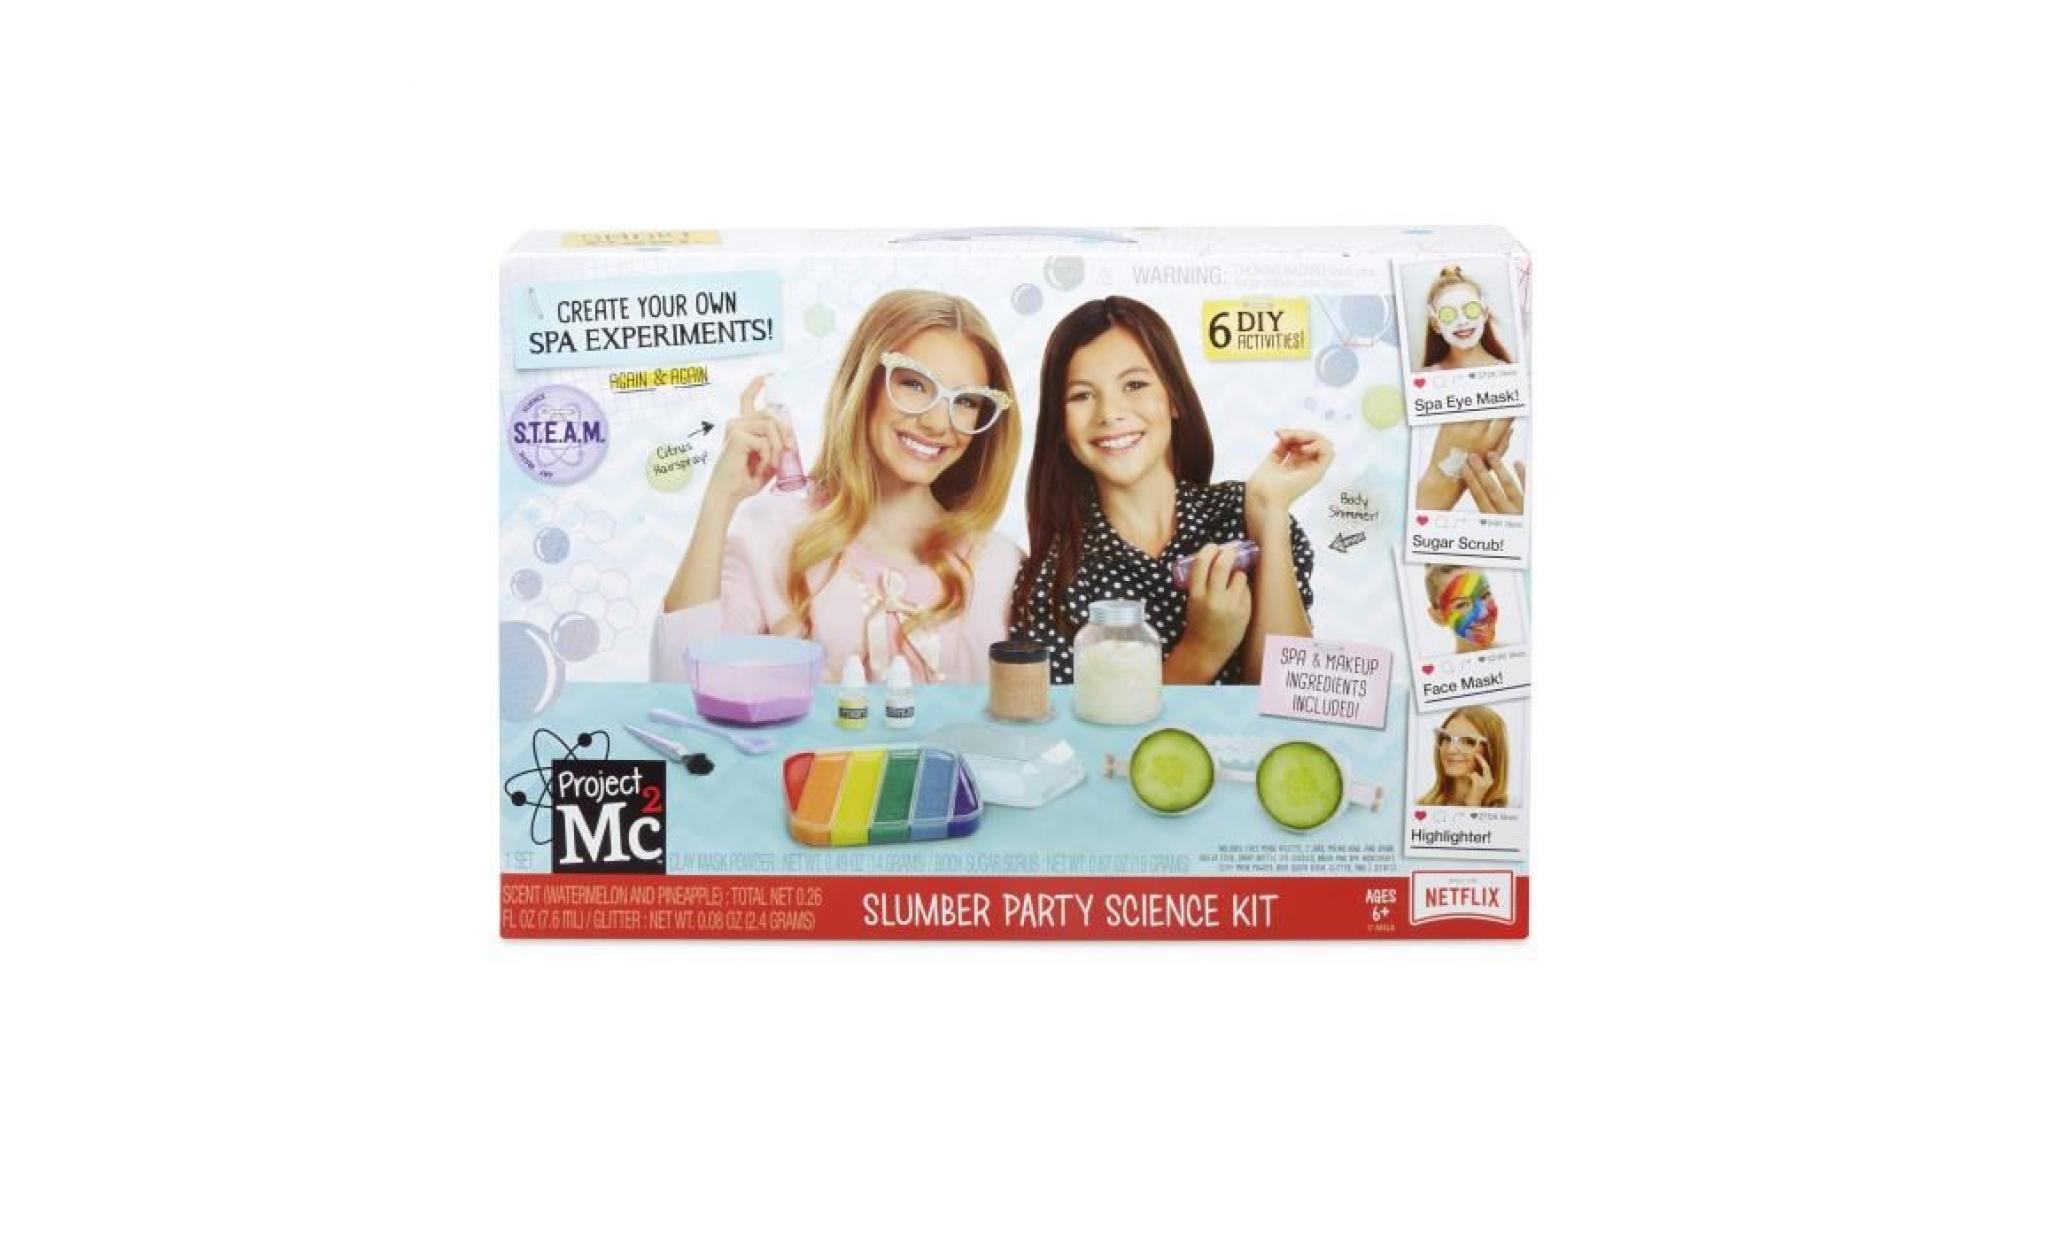 slumber party science kit to create your own spa treatments 1k2aaf